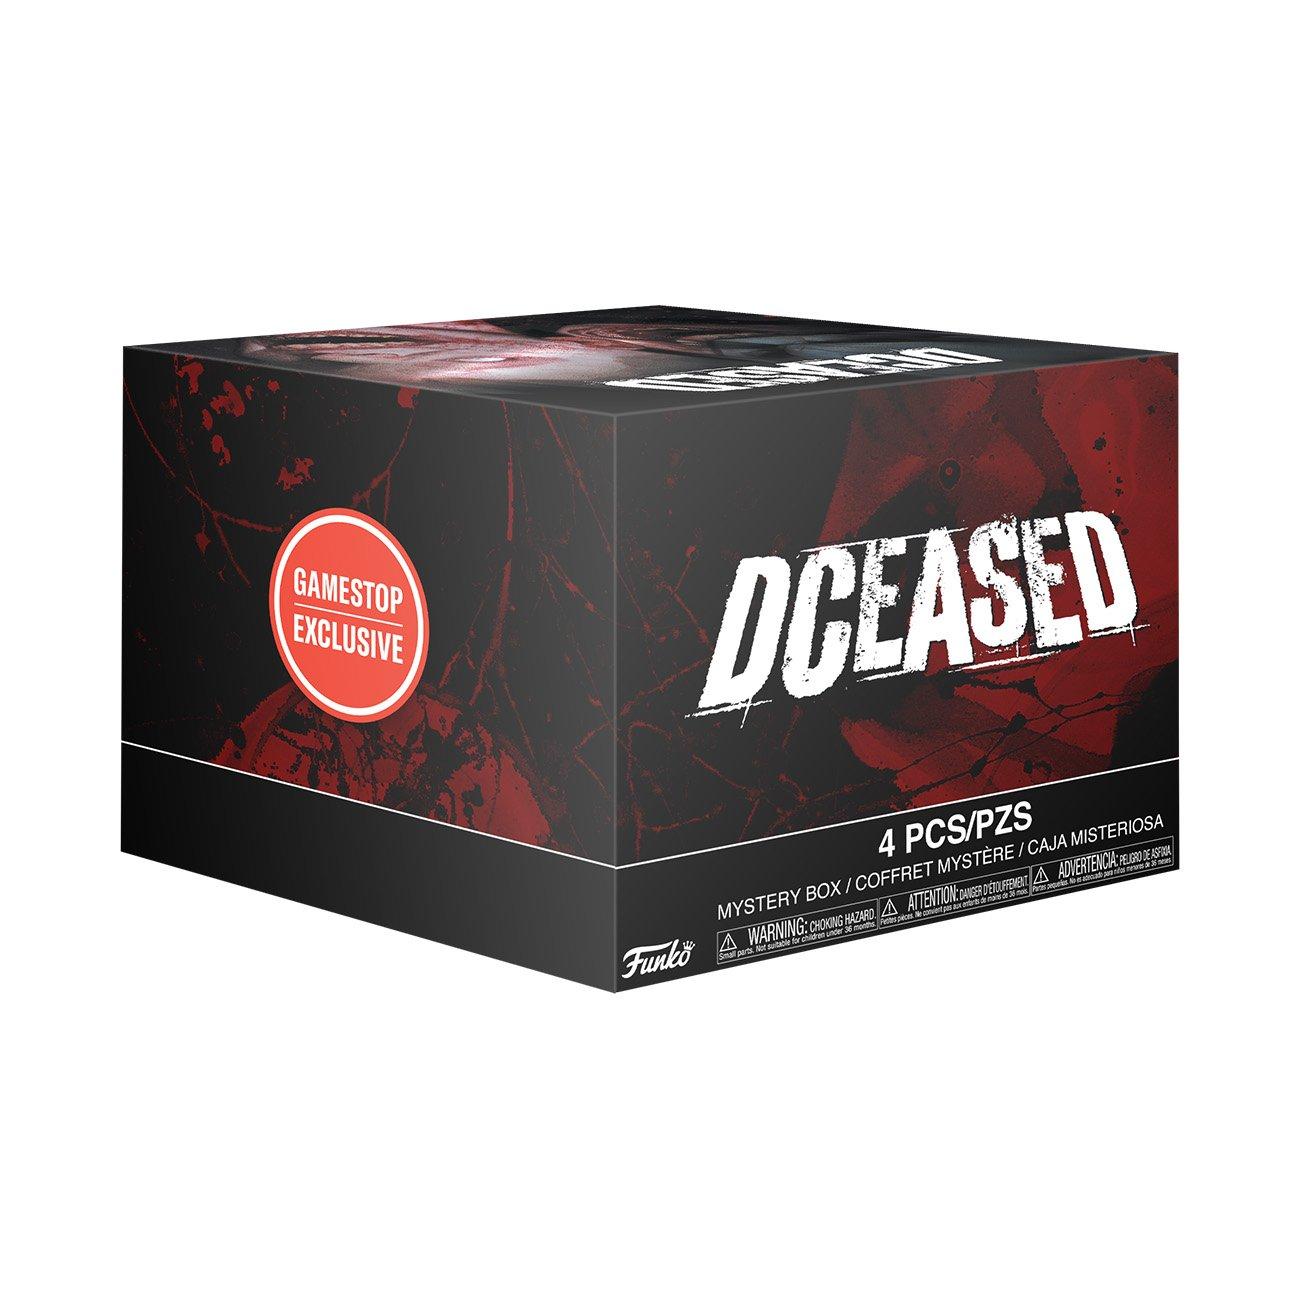 Funko DC Dceased Mystery Box 1 POP! Vinyl Figure, Pin, Keychain, and Decal GameStop Exclusive